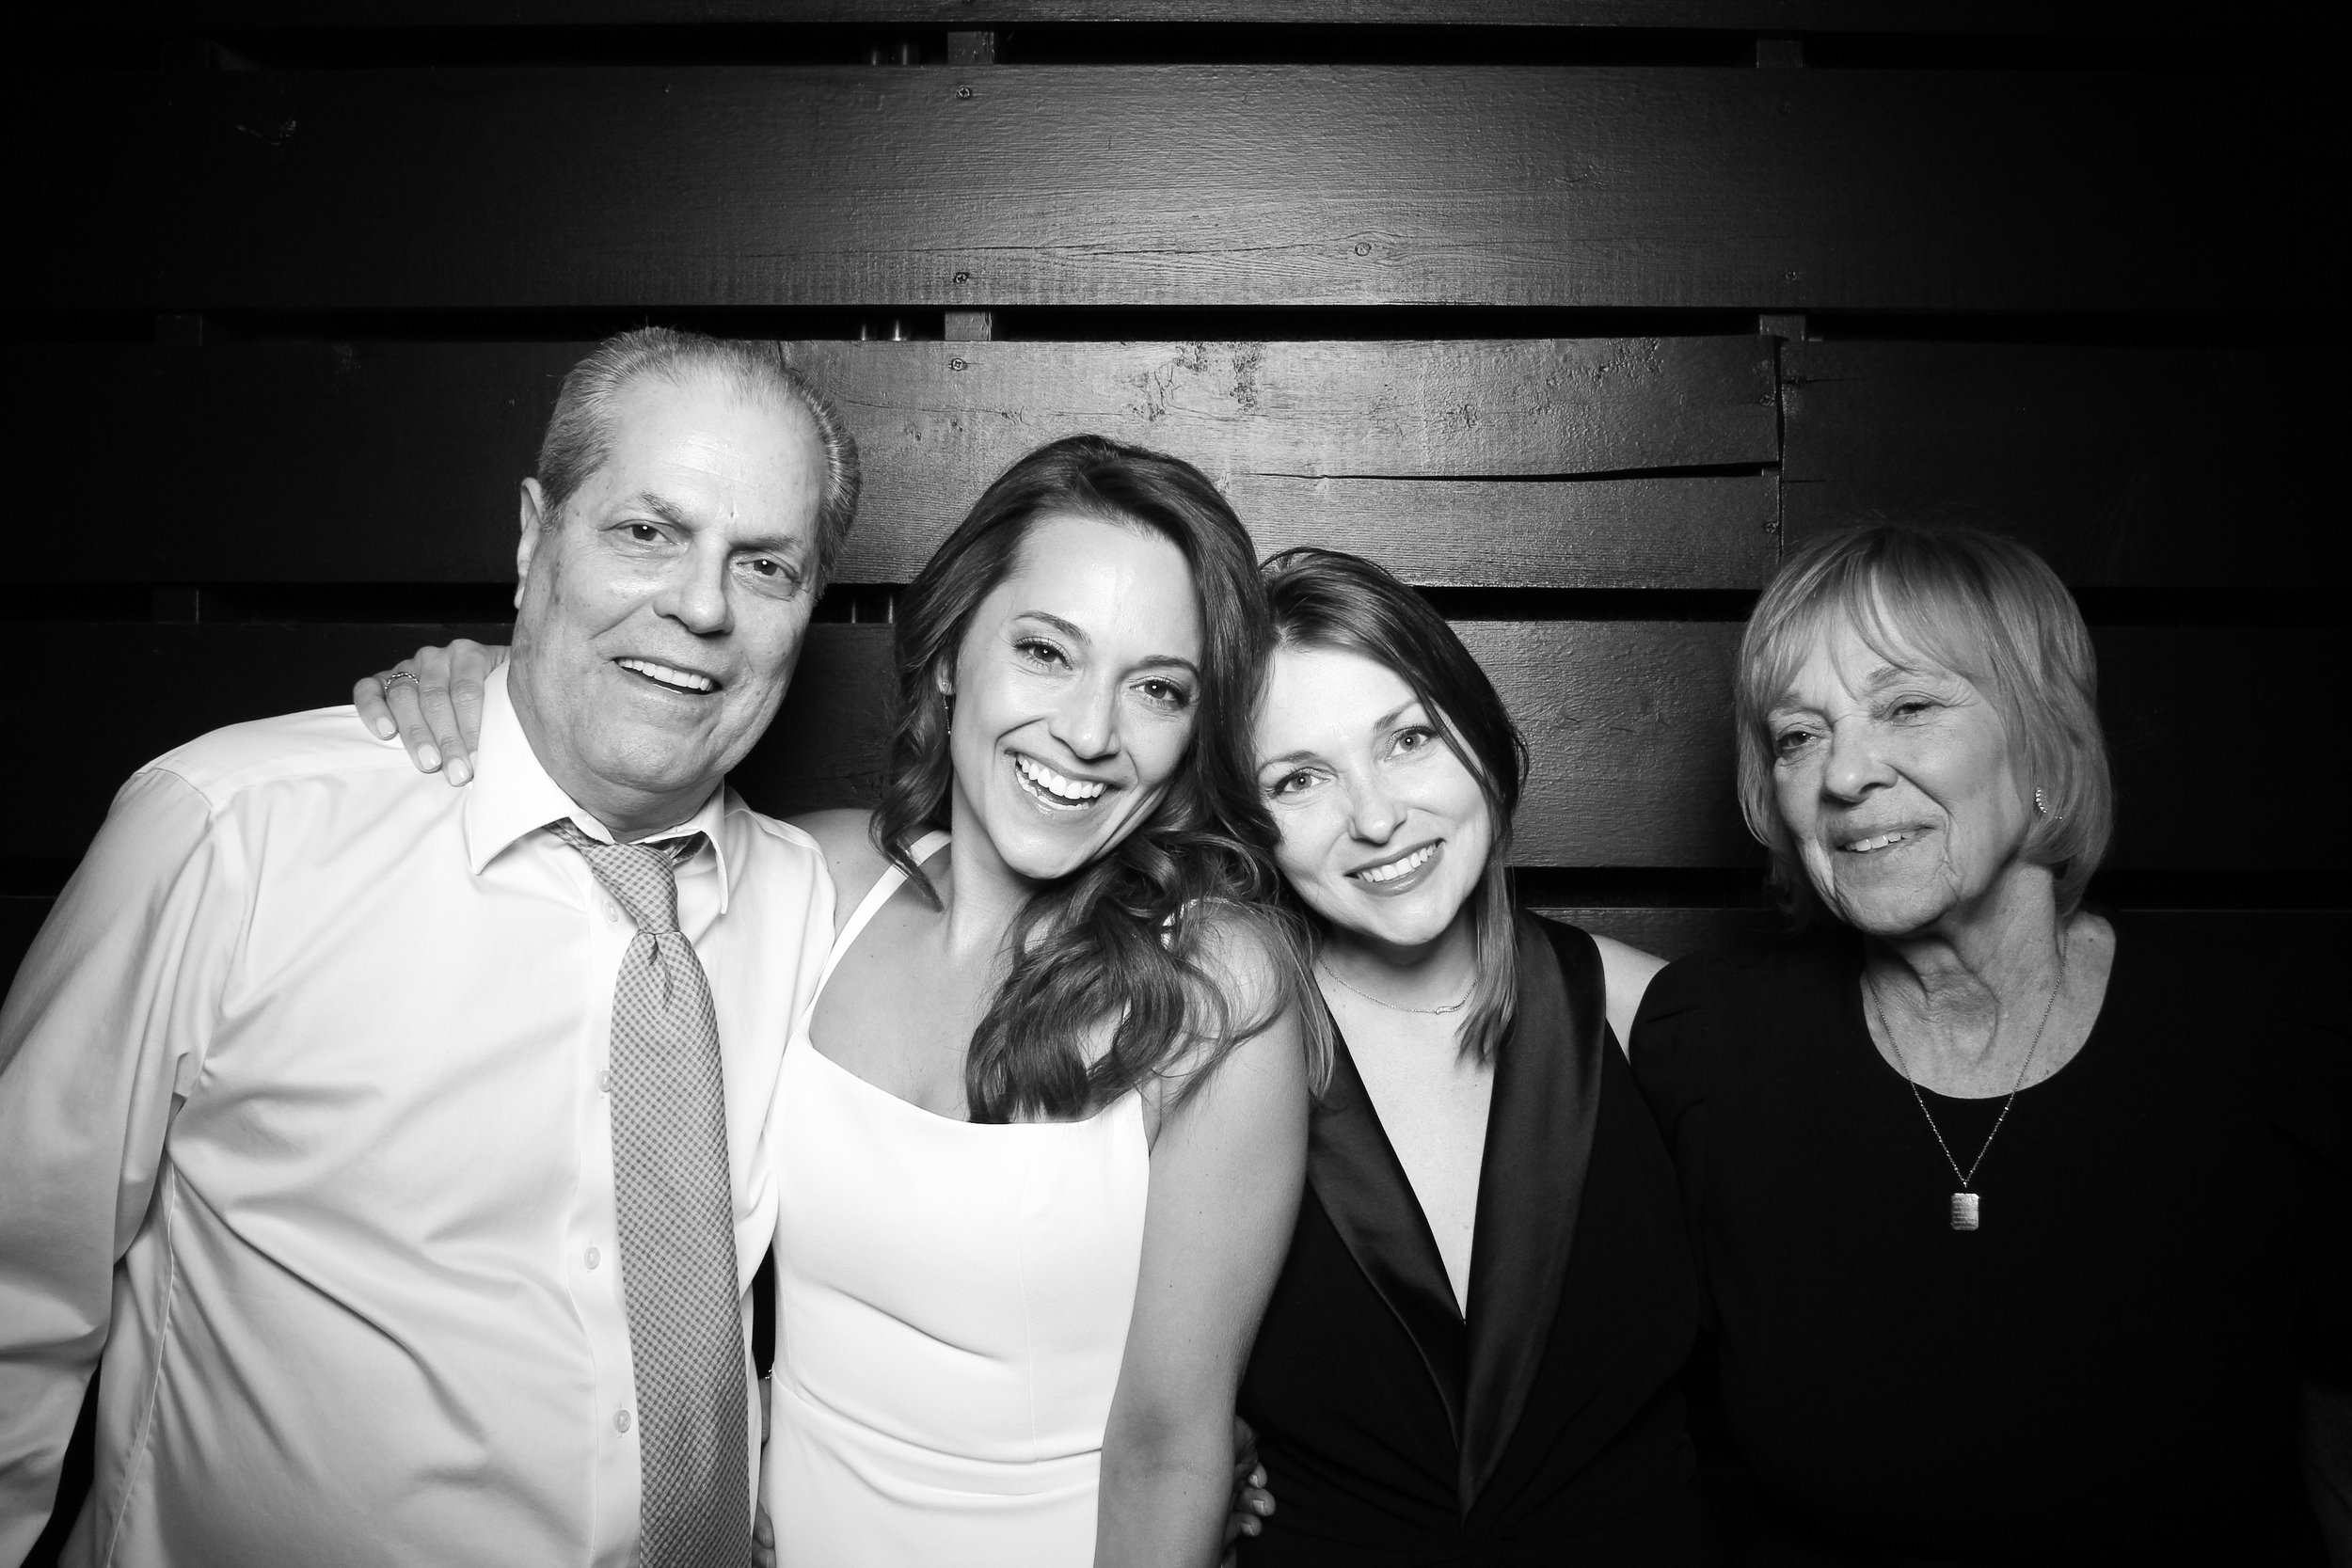 Fotio_Photo_Booth_Chicago_Winery_Clark_Street_Party_Family_Fun_Terrace_Superfans_River_North_09.jpg